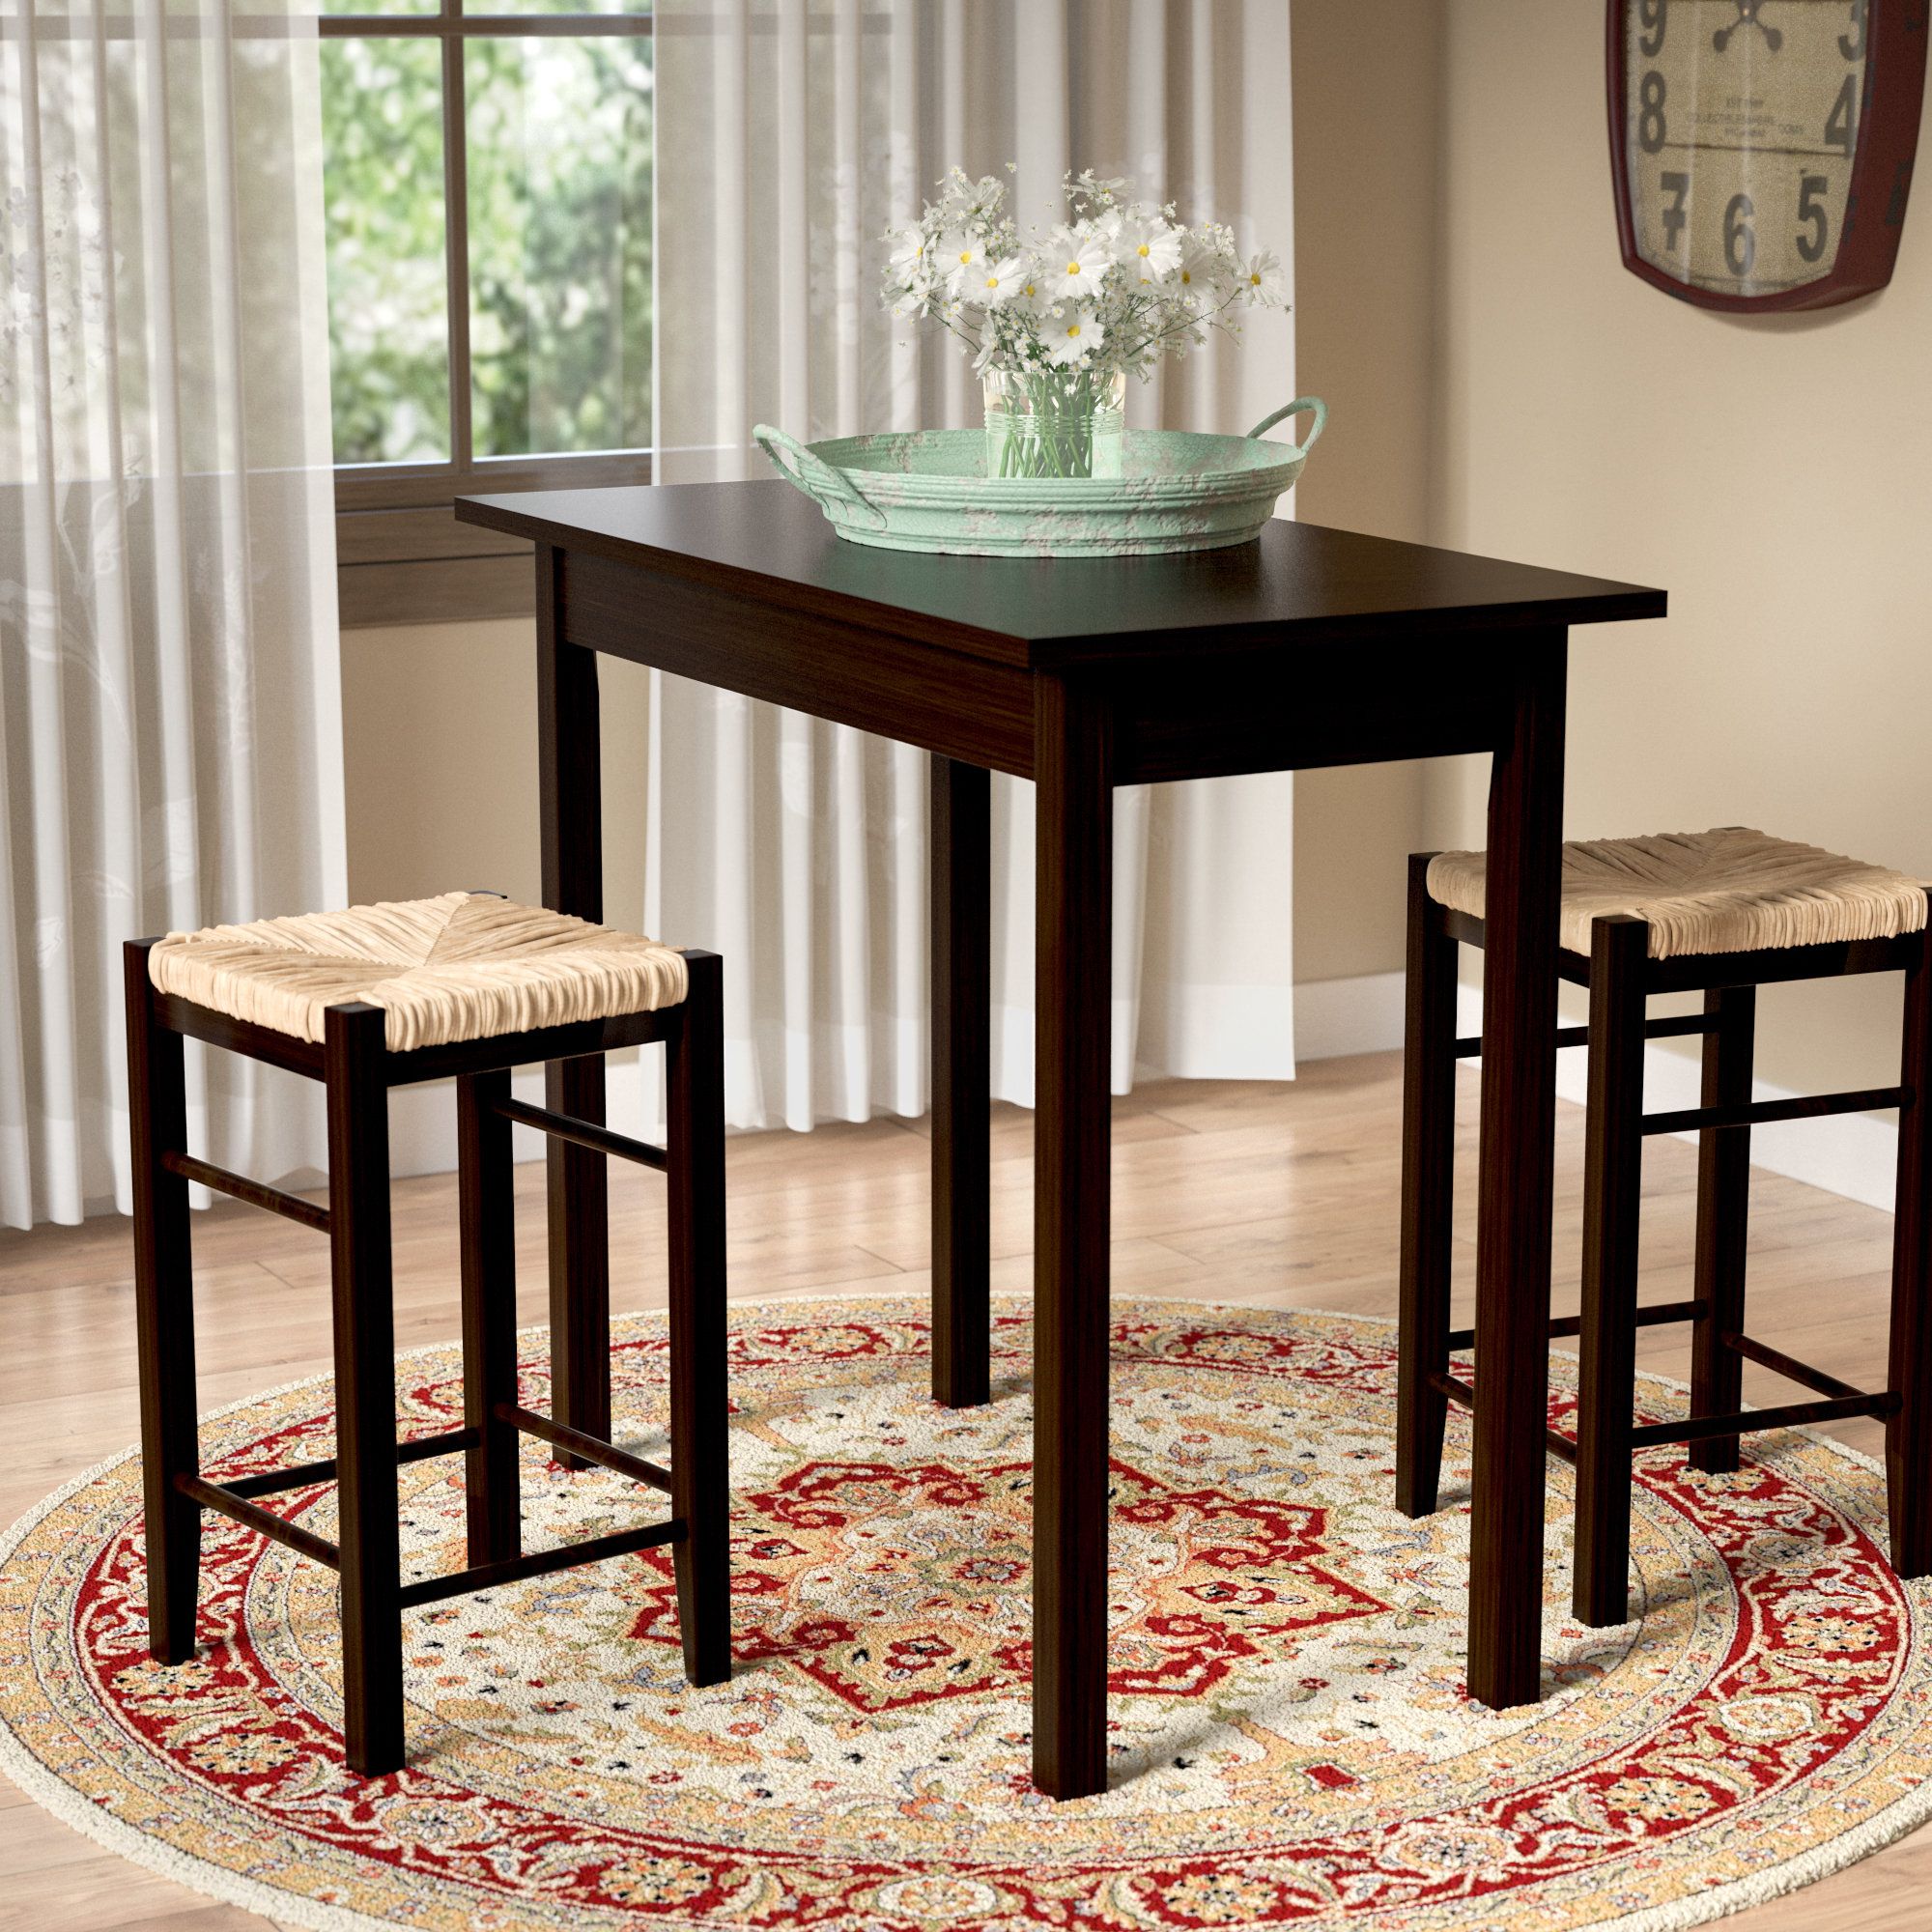 August Grove Tenney 3 Piece Counter Height Dining Set & Reviews With Regard To Most Recent Kinsler 3 Piece Bistro Sets (View 15 of 20)